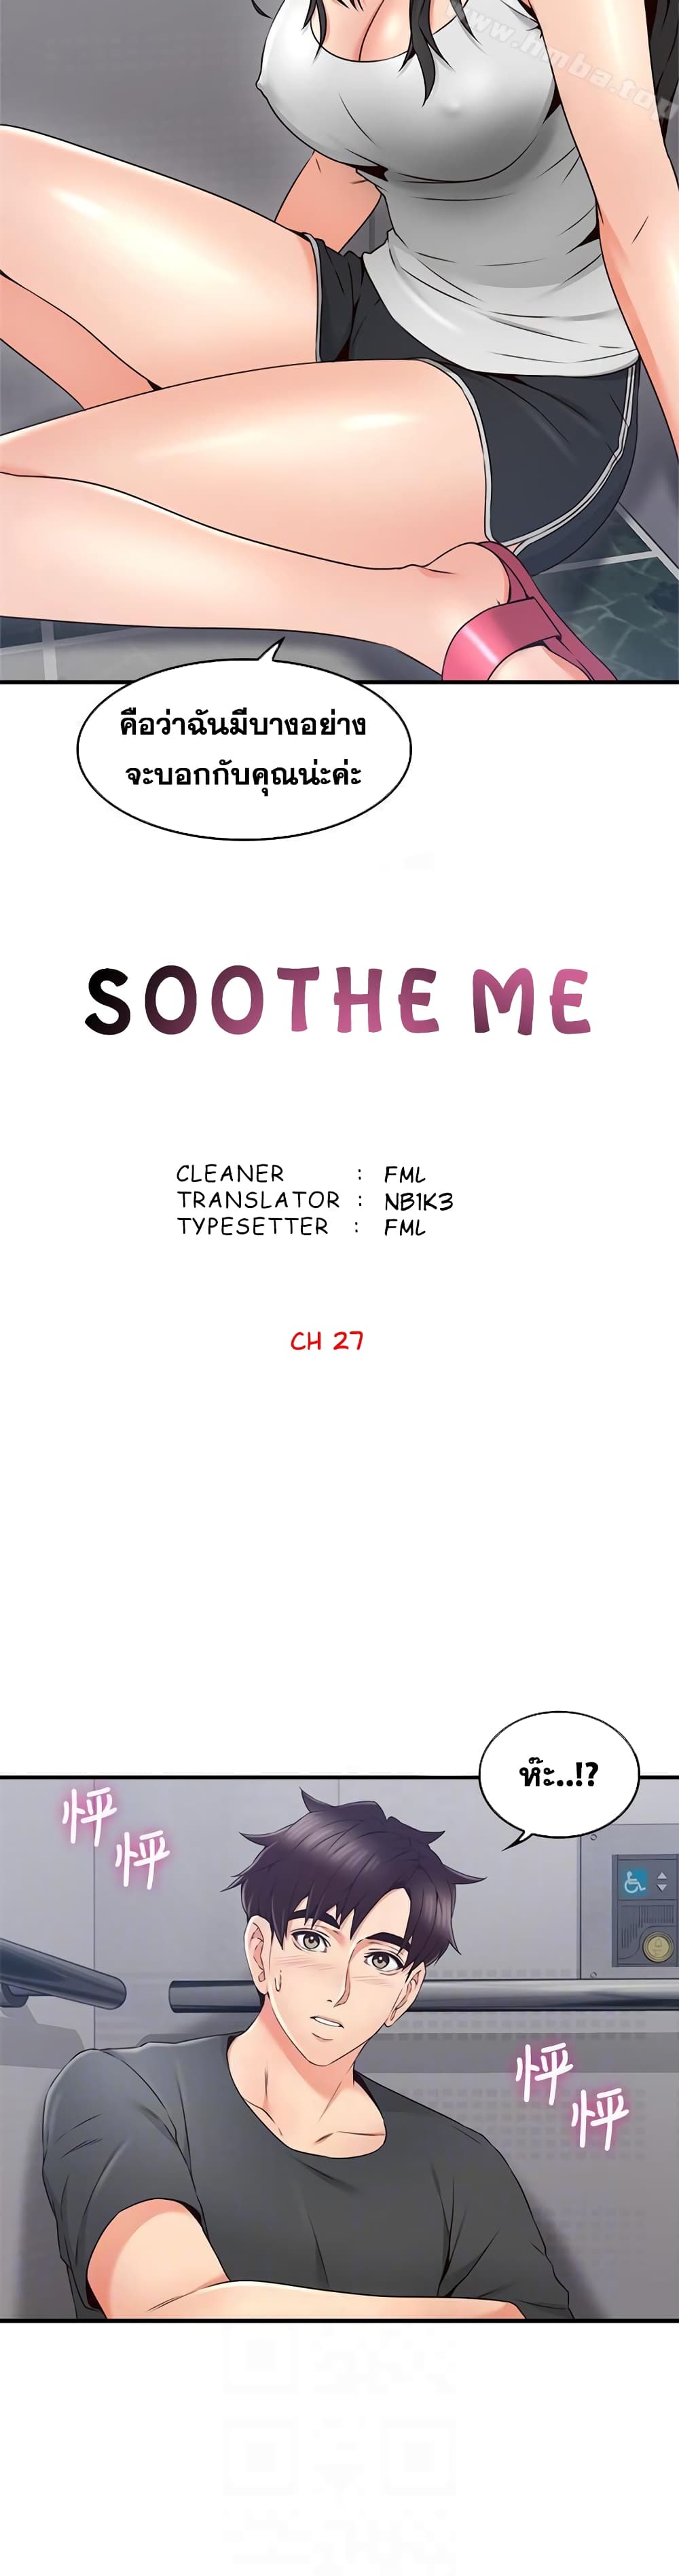 Soothe Me! 27-27